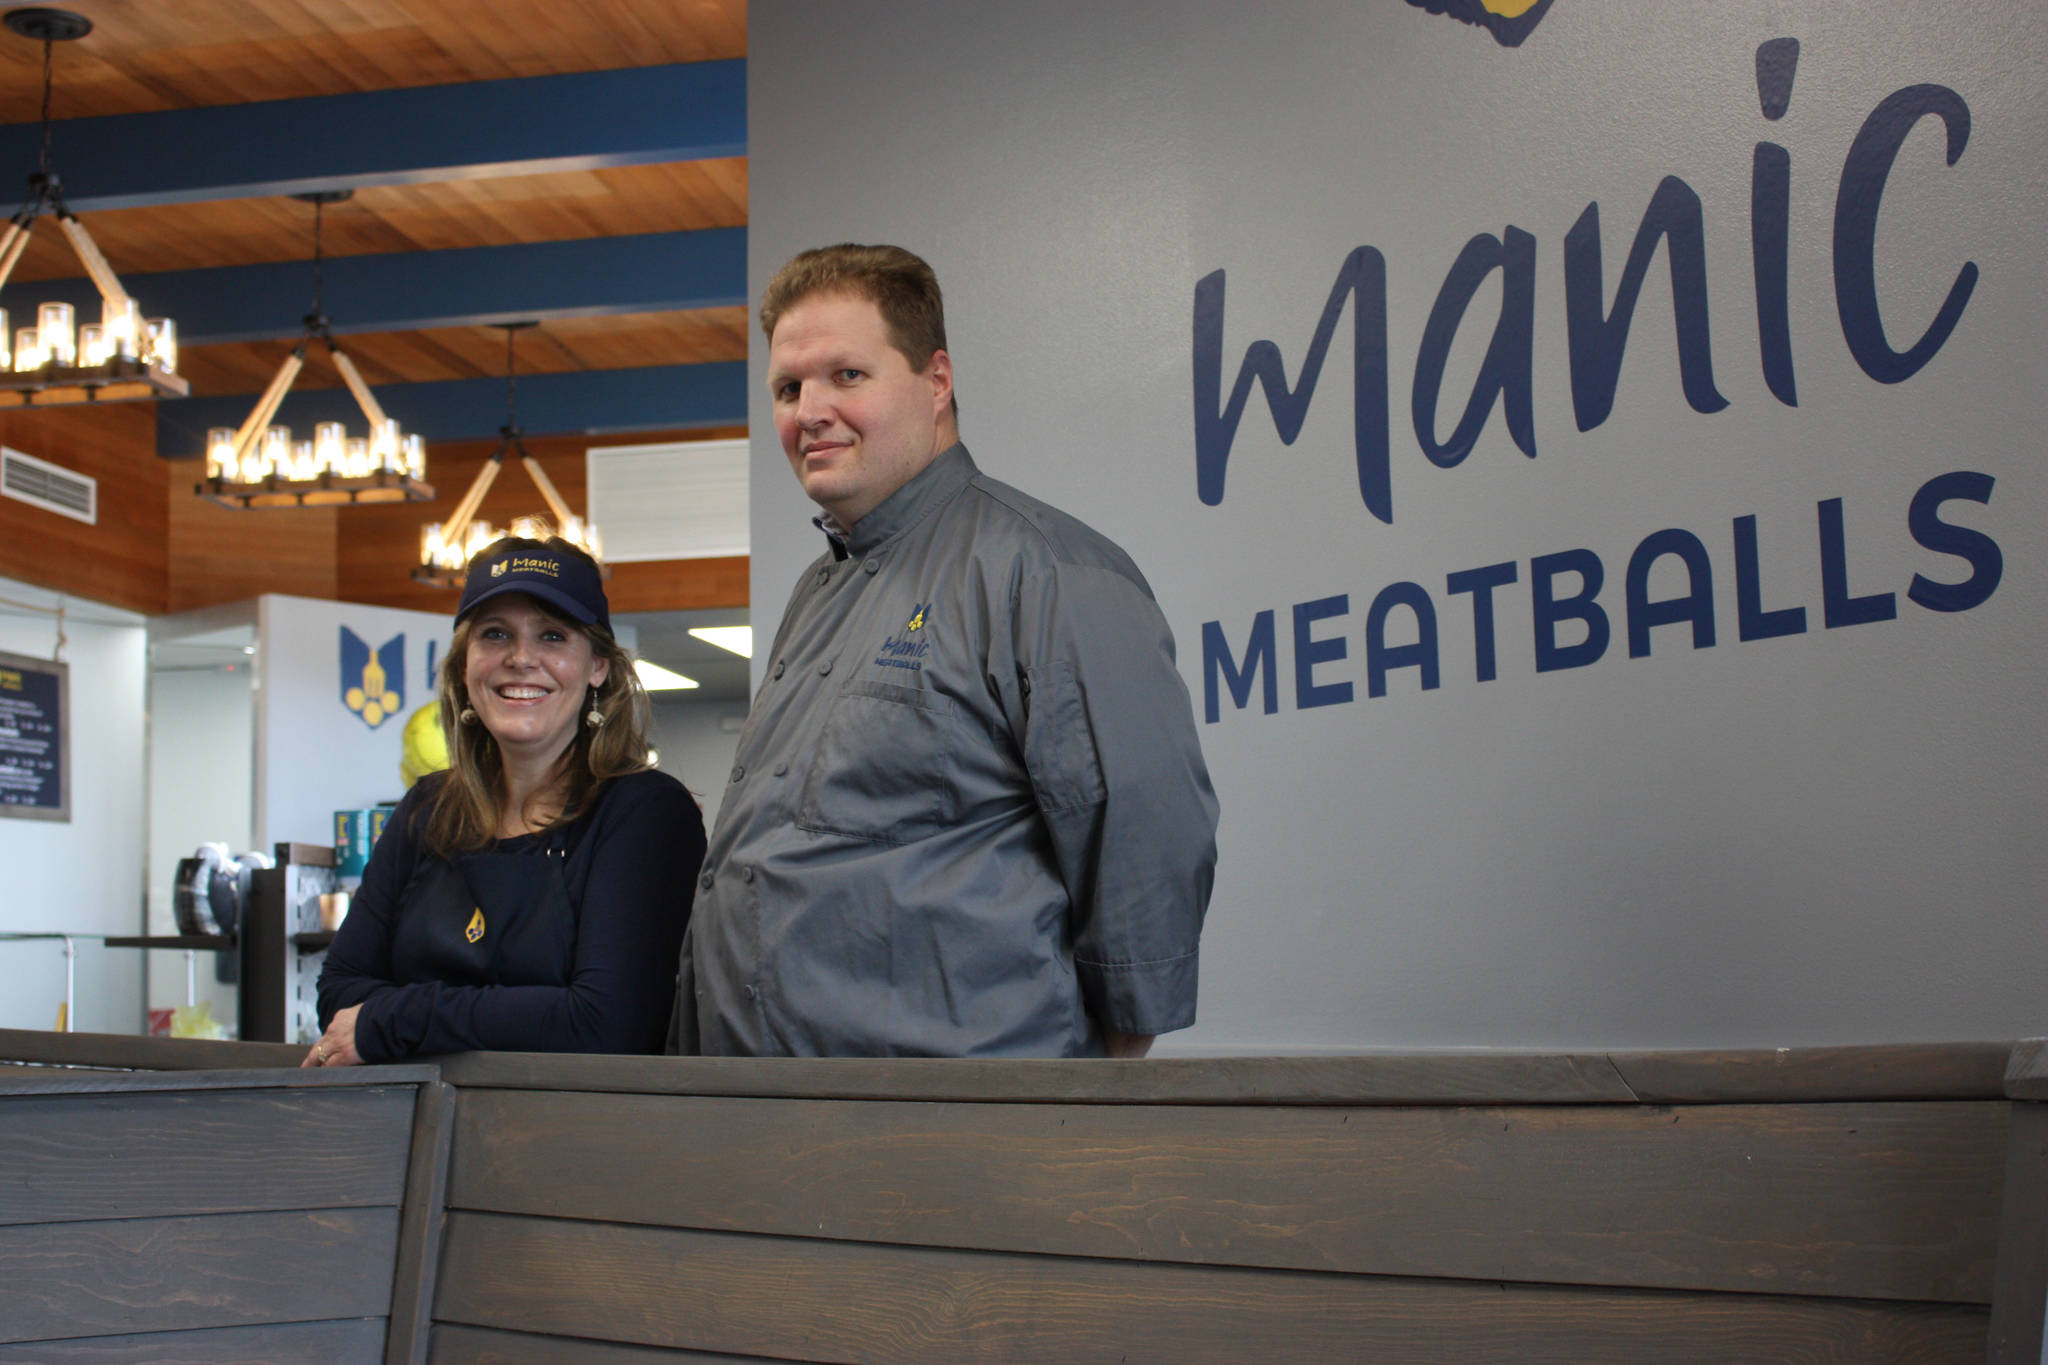 Owners of Manic Meatballs, Carrie Stalder (left) and Chad Stalder. (Photo by Cameron Sheppard)